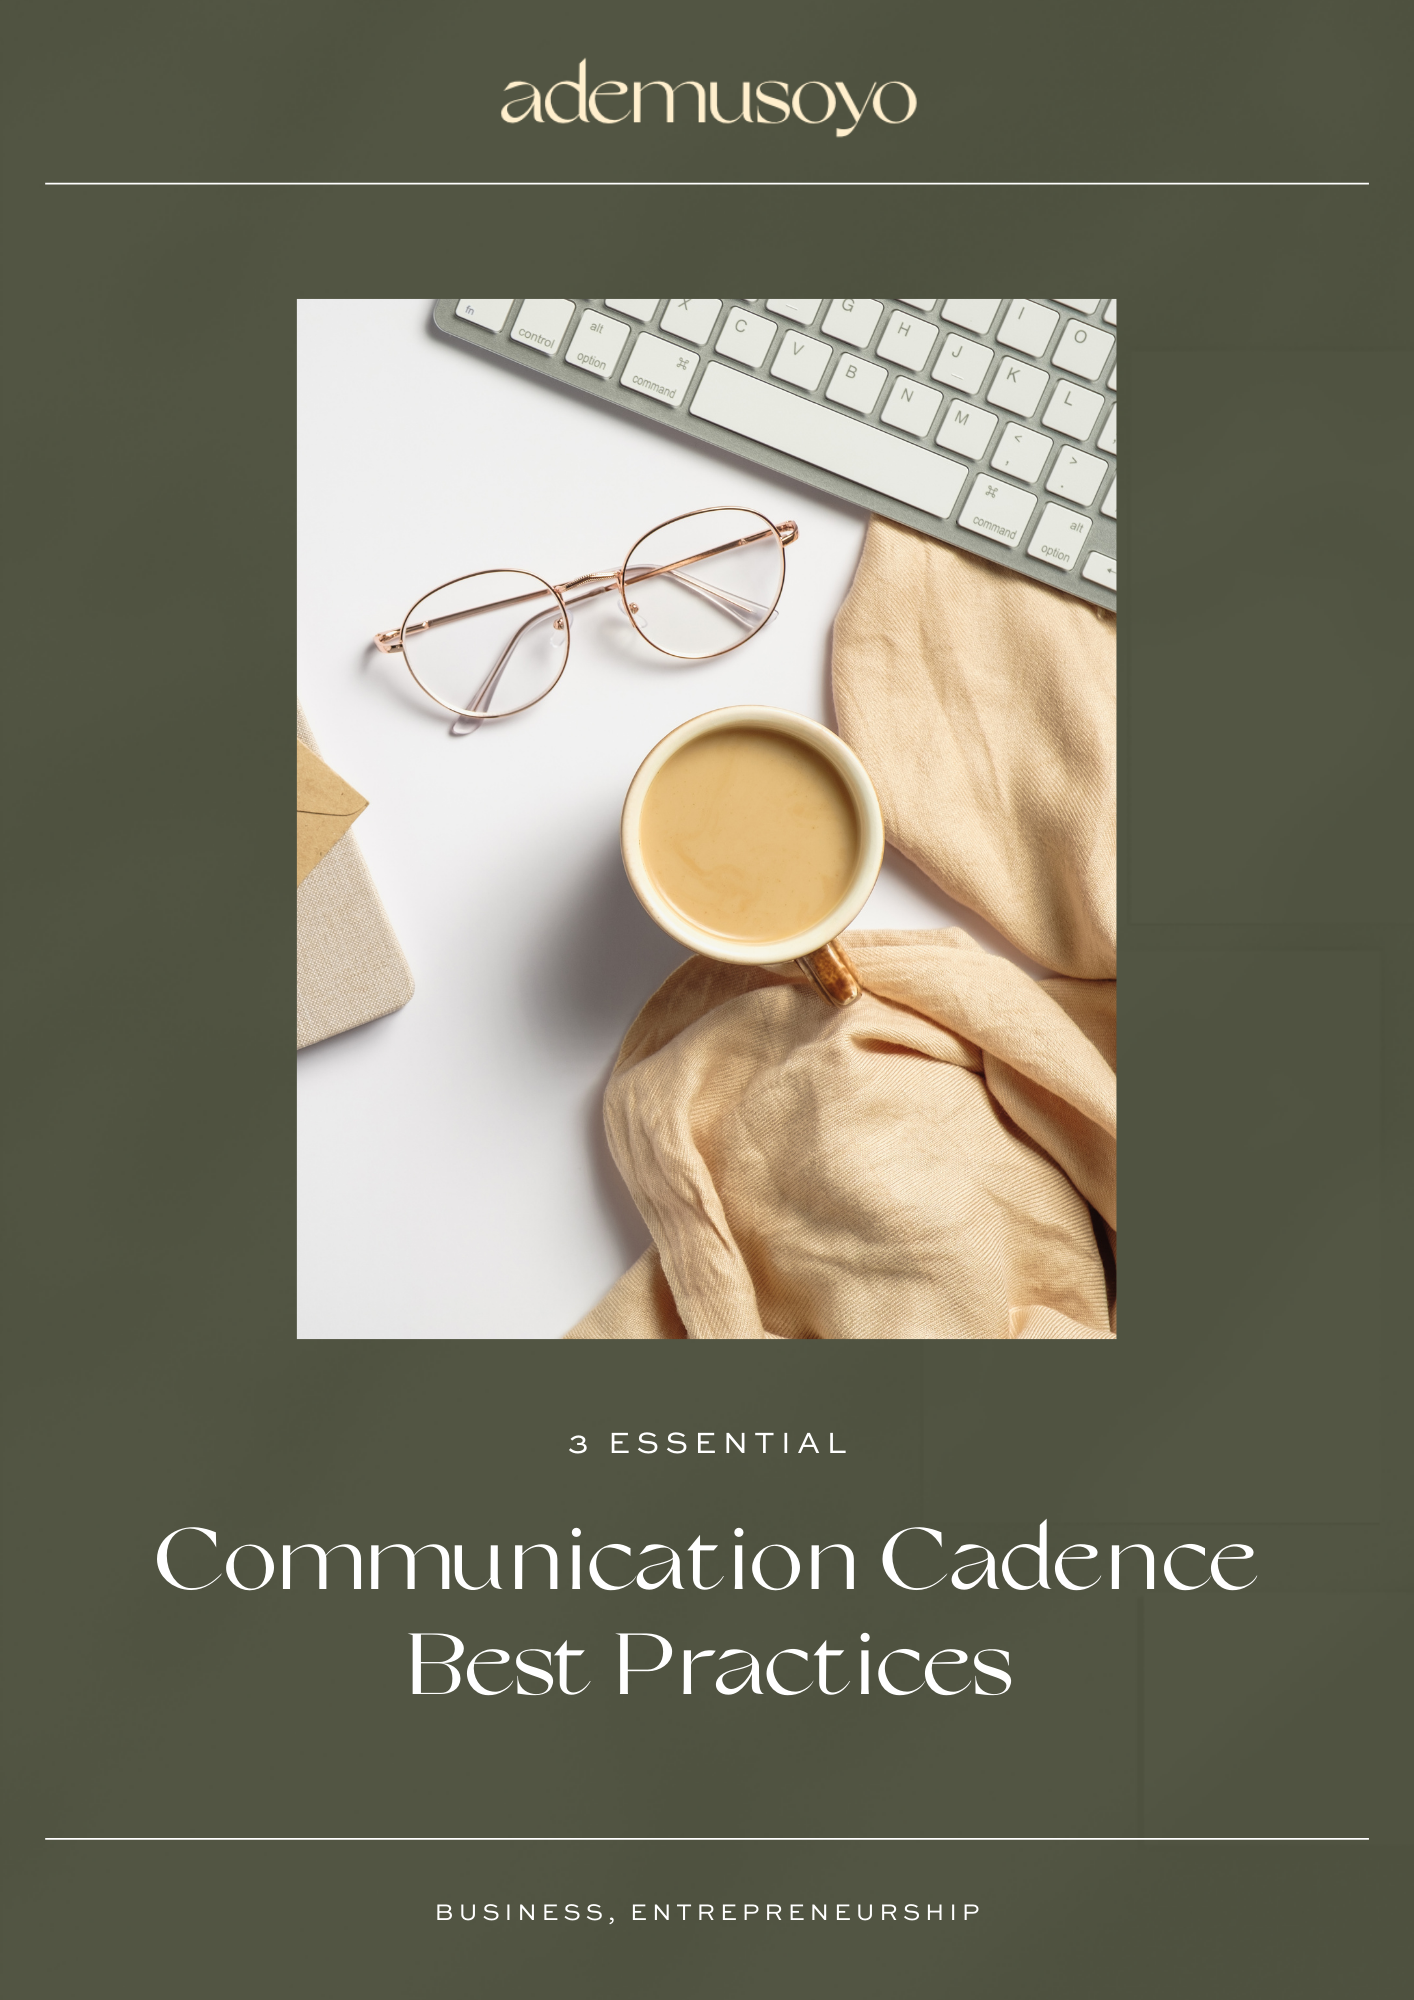 3 Essential Communication Cadence Best Practices